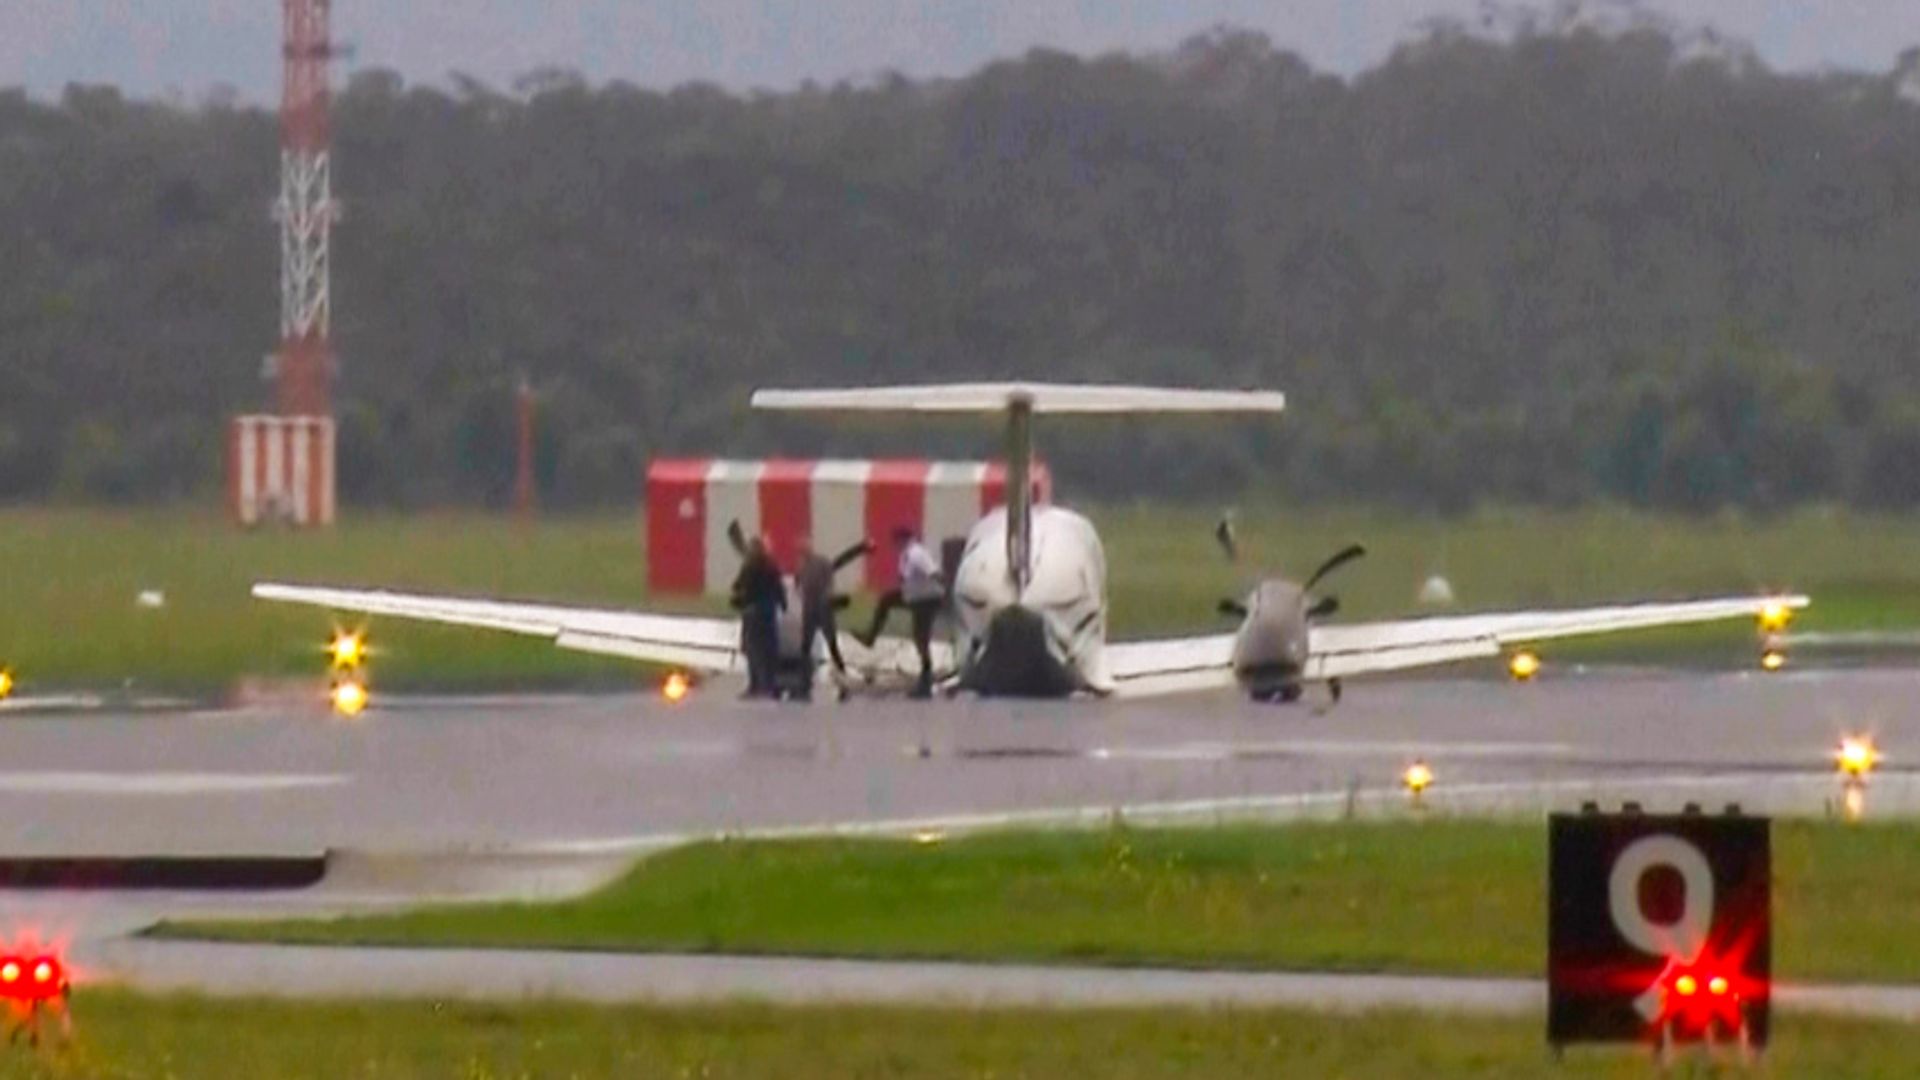 'The pilot was awesome': Plane touches down safely without landing gear